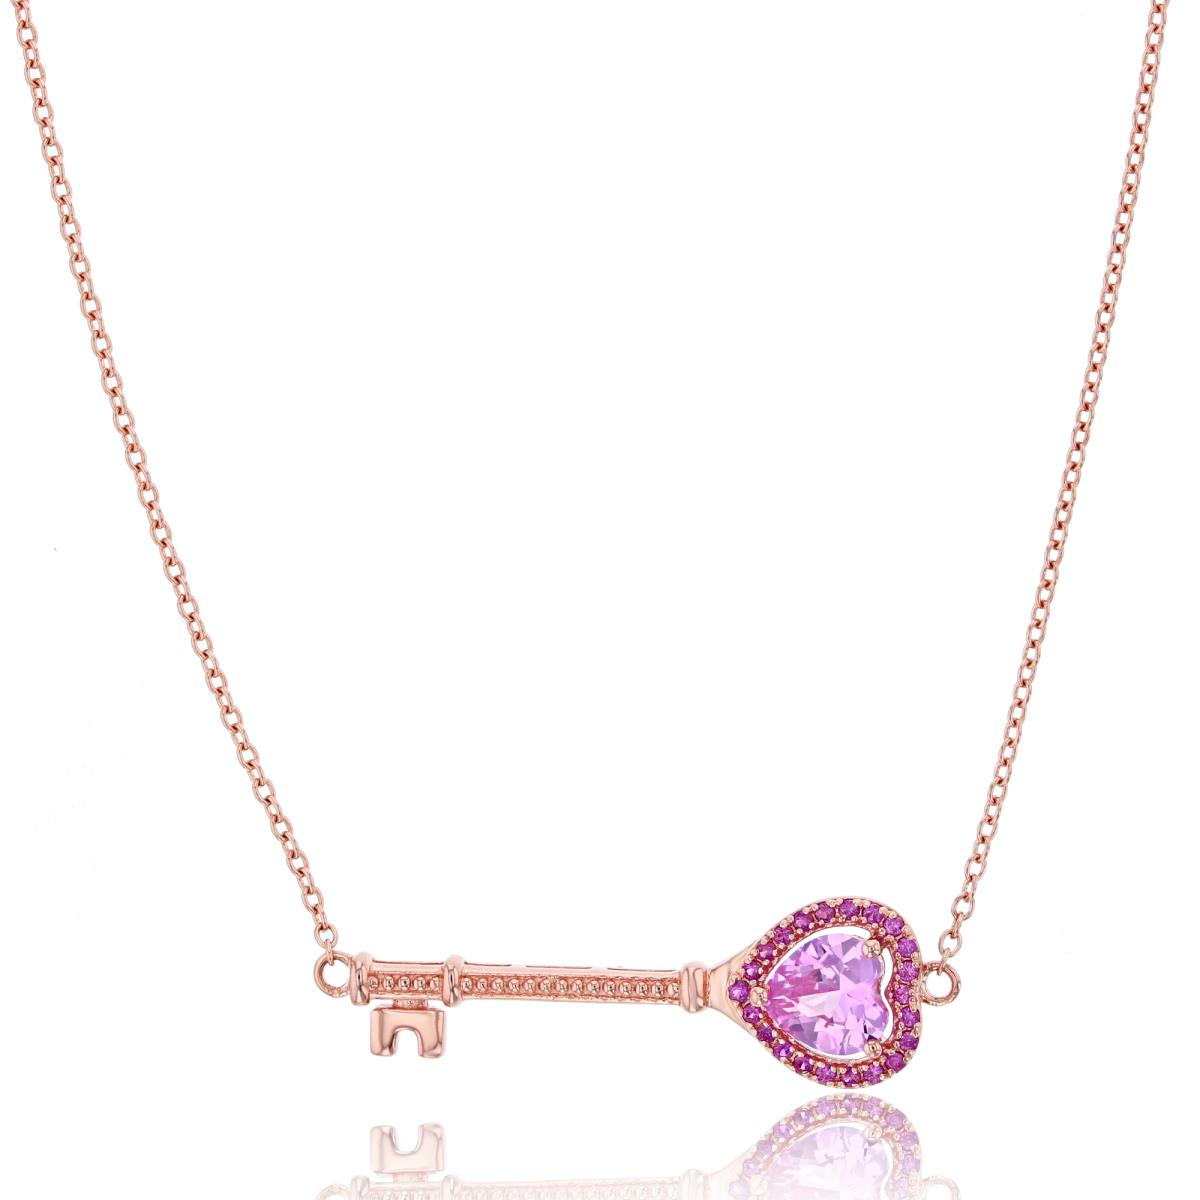 Sterling Silver+1Micron 14KR Gold 6mm HS Cr.Pink Sapphire & Rnd Cr.Ruby Key 18"Necklace